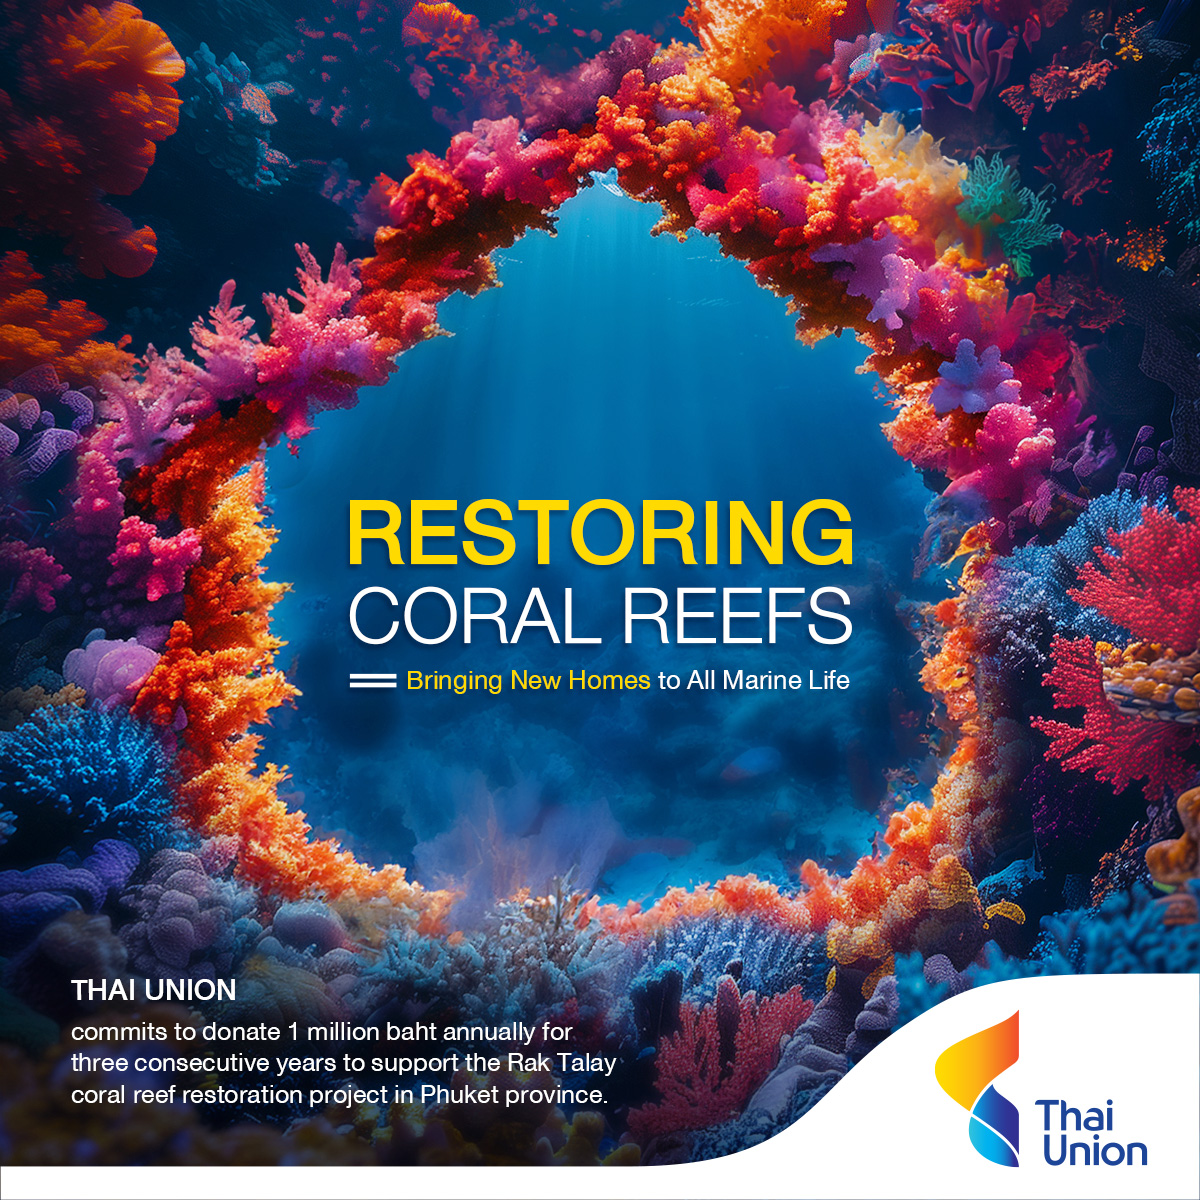 Thai Union are committed to supporting the 'Rak Talay' coral reef restoration project with an annual budget of 1 million baht for three consecutive years, This initiative aims to build eco-friendly artificial reefs in Phuket province #ThaiUnion #HealthyLivingHealthyOceans